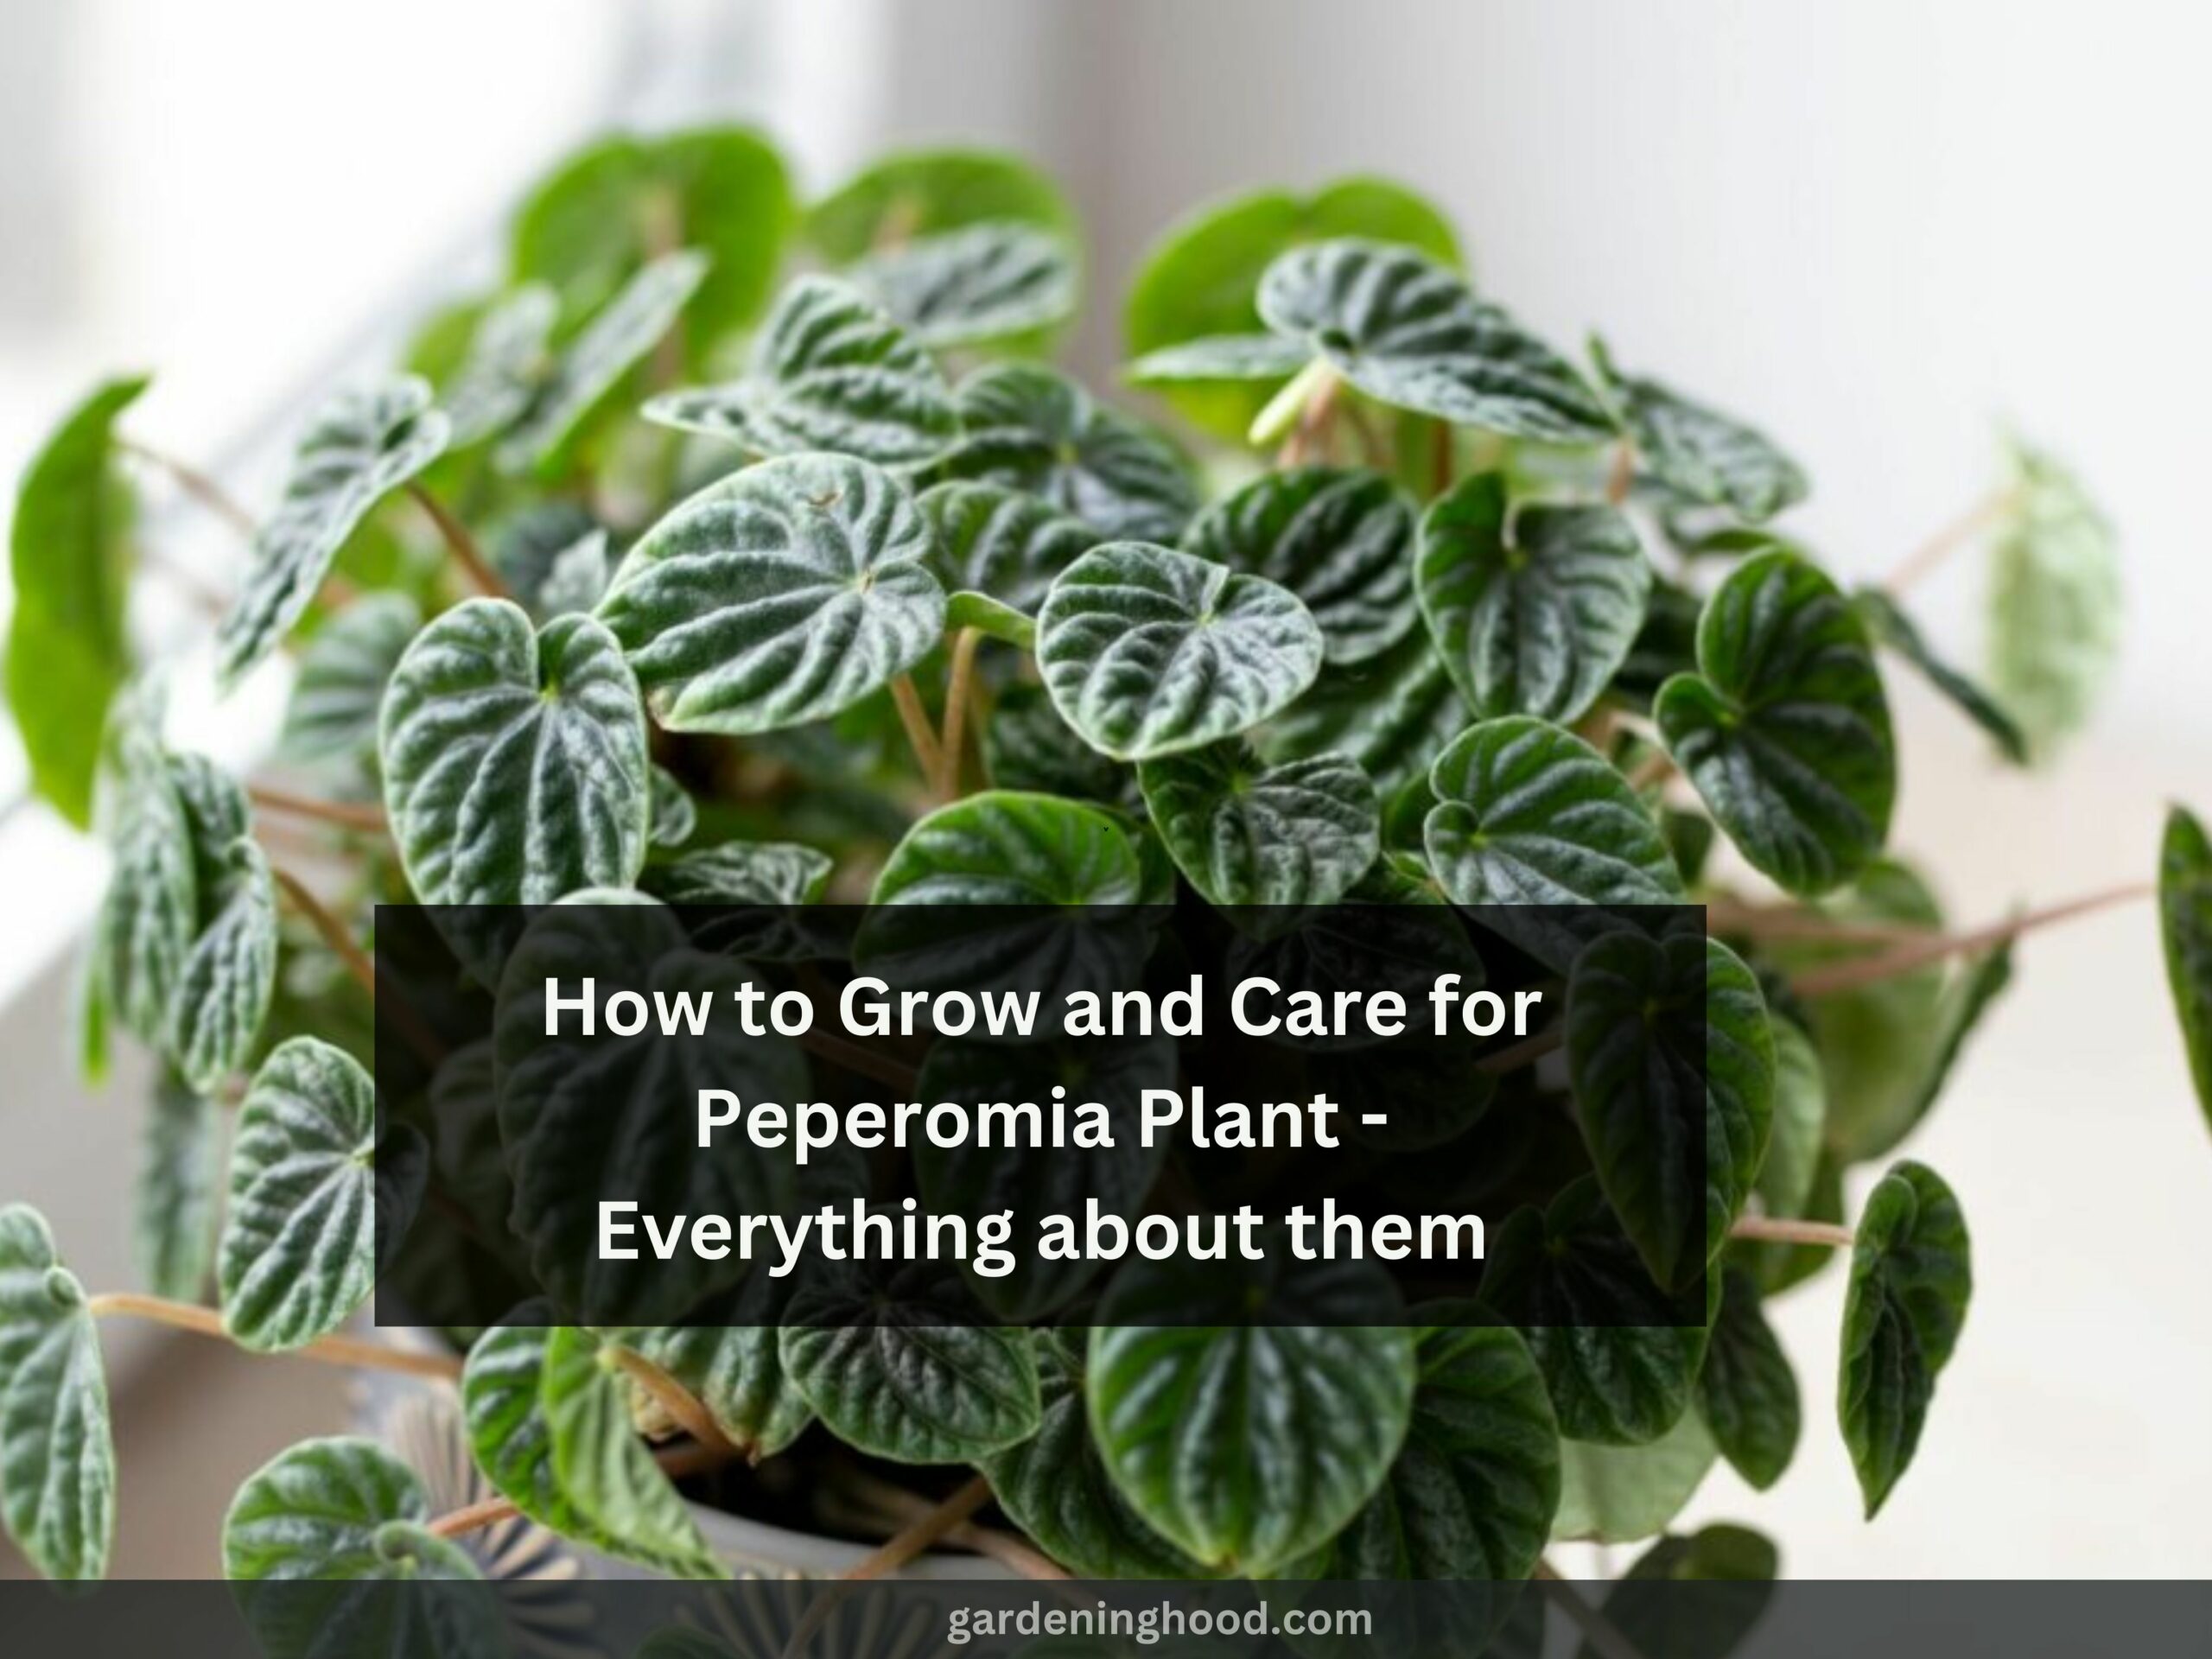 How to Grow and Care for Peperomia Plant - Everything about them